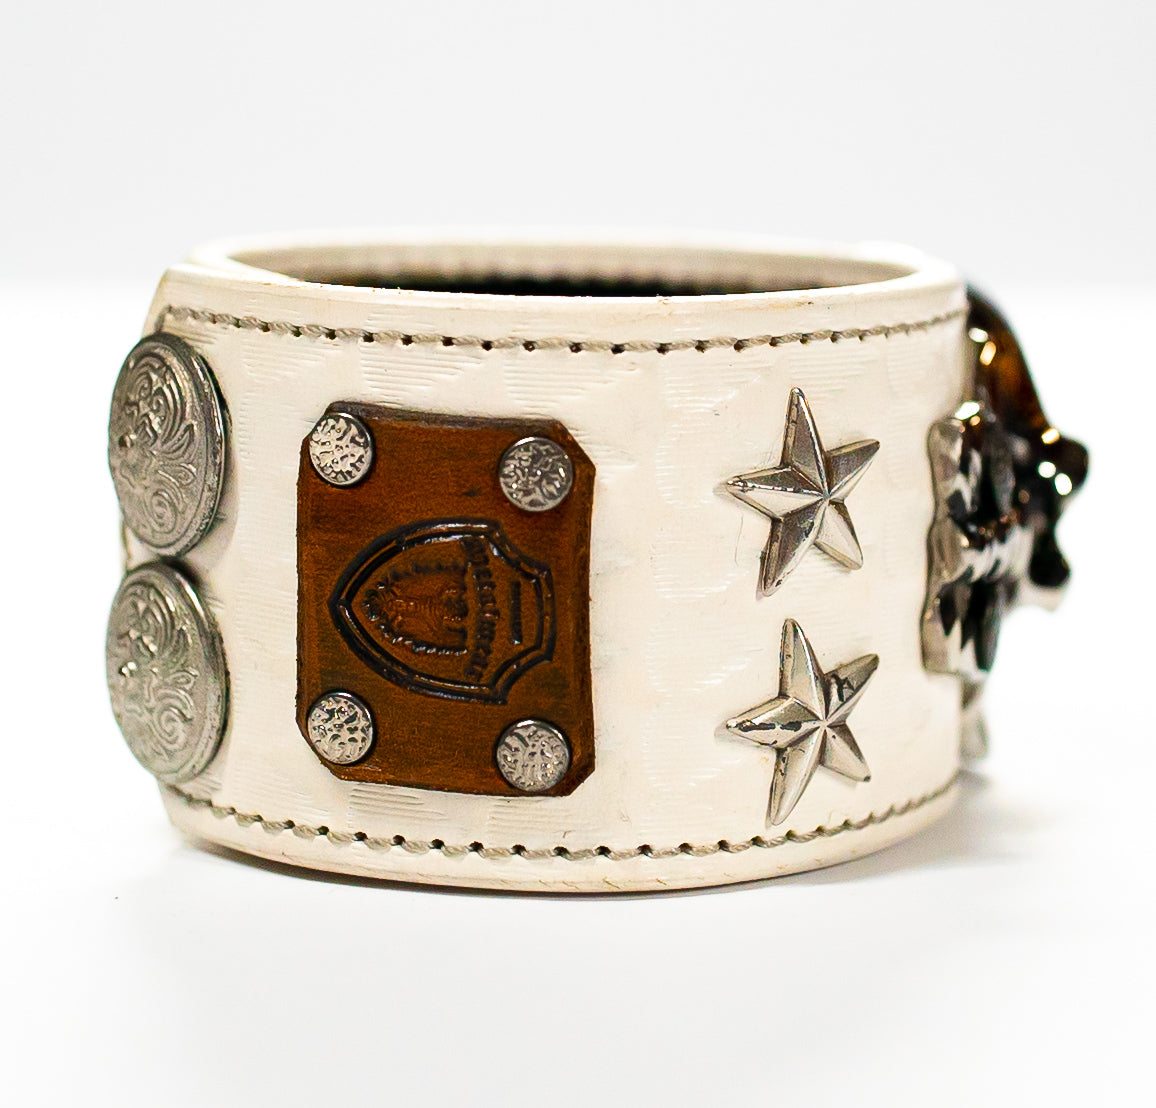 The Big Skull White Leather Cuff label side